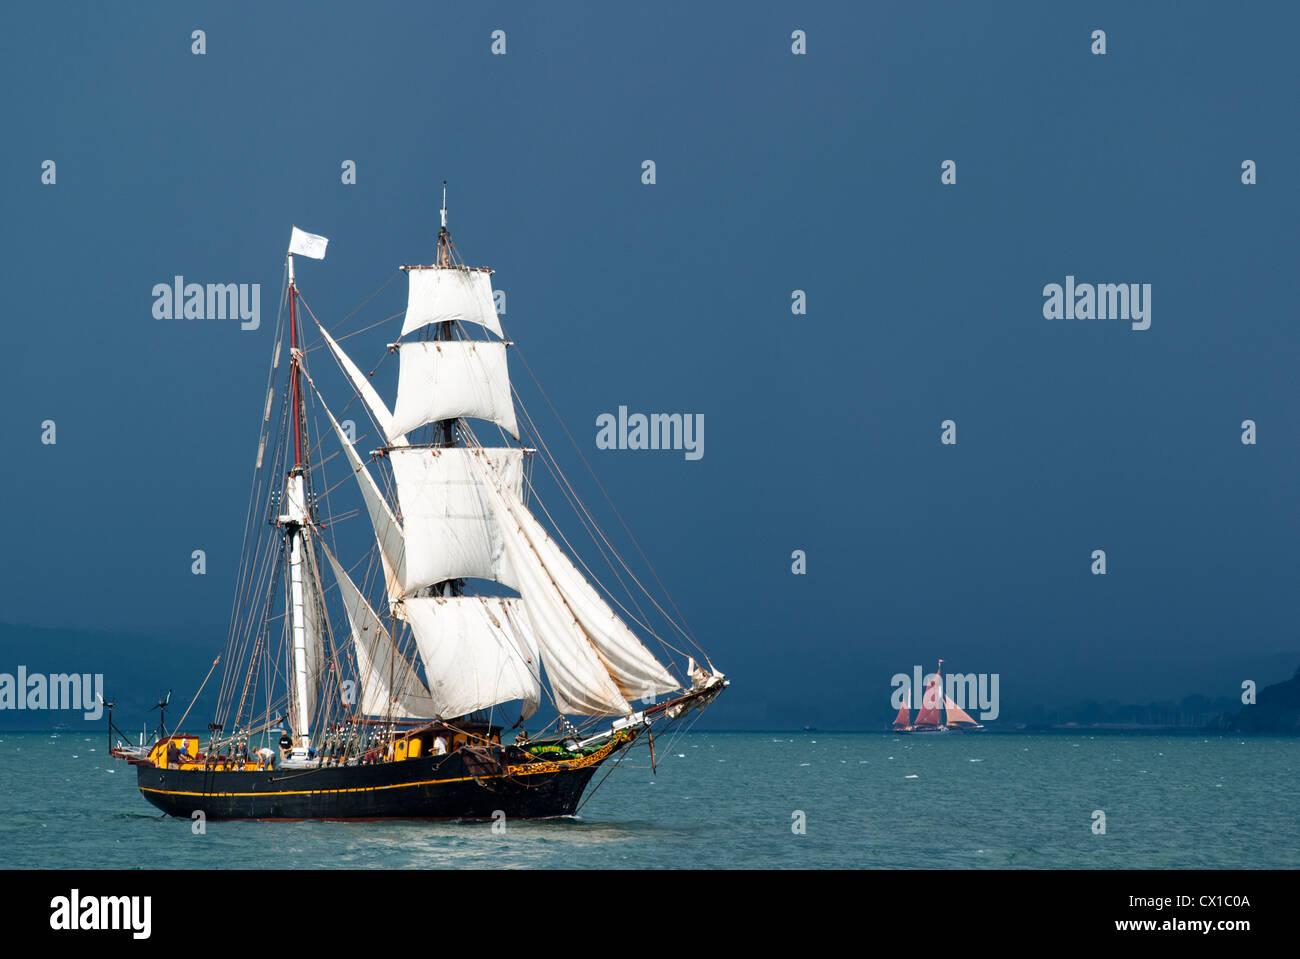 Tall Ship, the Sailing Vessel and Cargo Ship, Brigadine Tres Hombres, Two Masted and Square Rigged Schooner Stock Photo